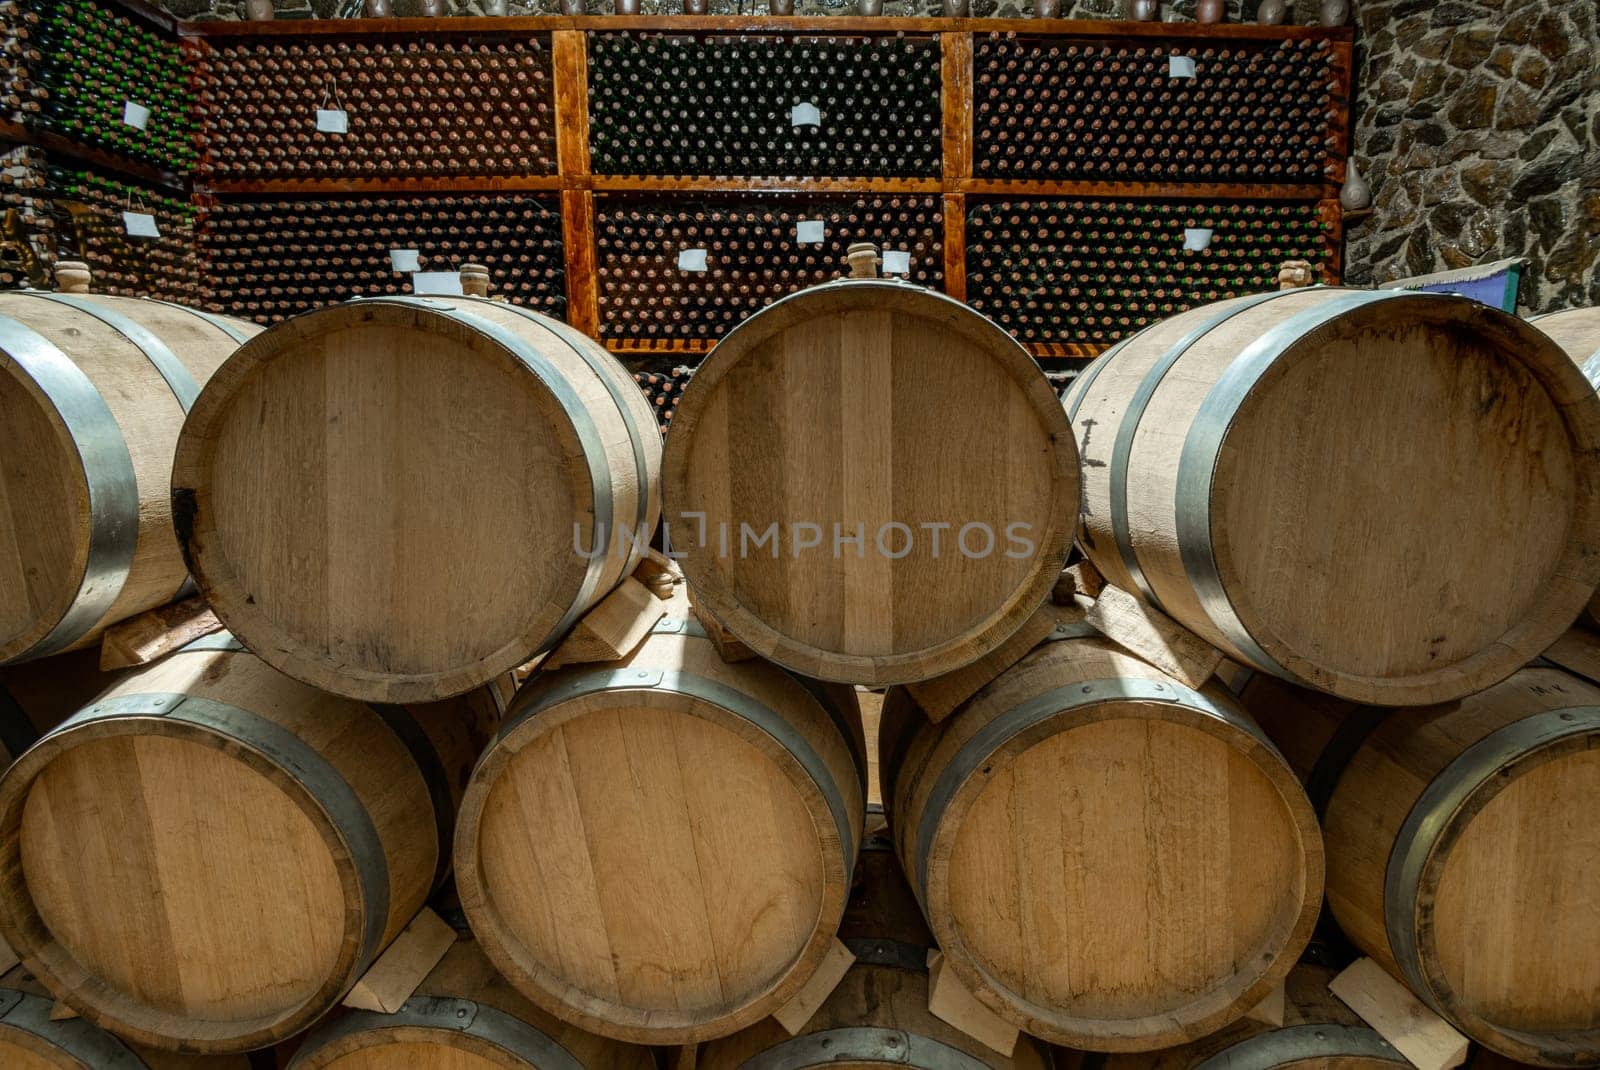 The wooden wine barrels with a wine cellar in the background by A_Karim